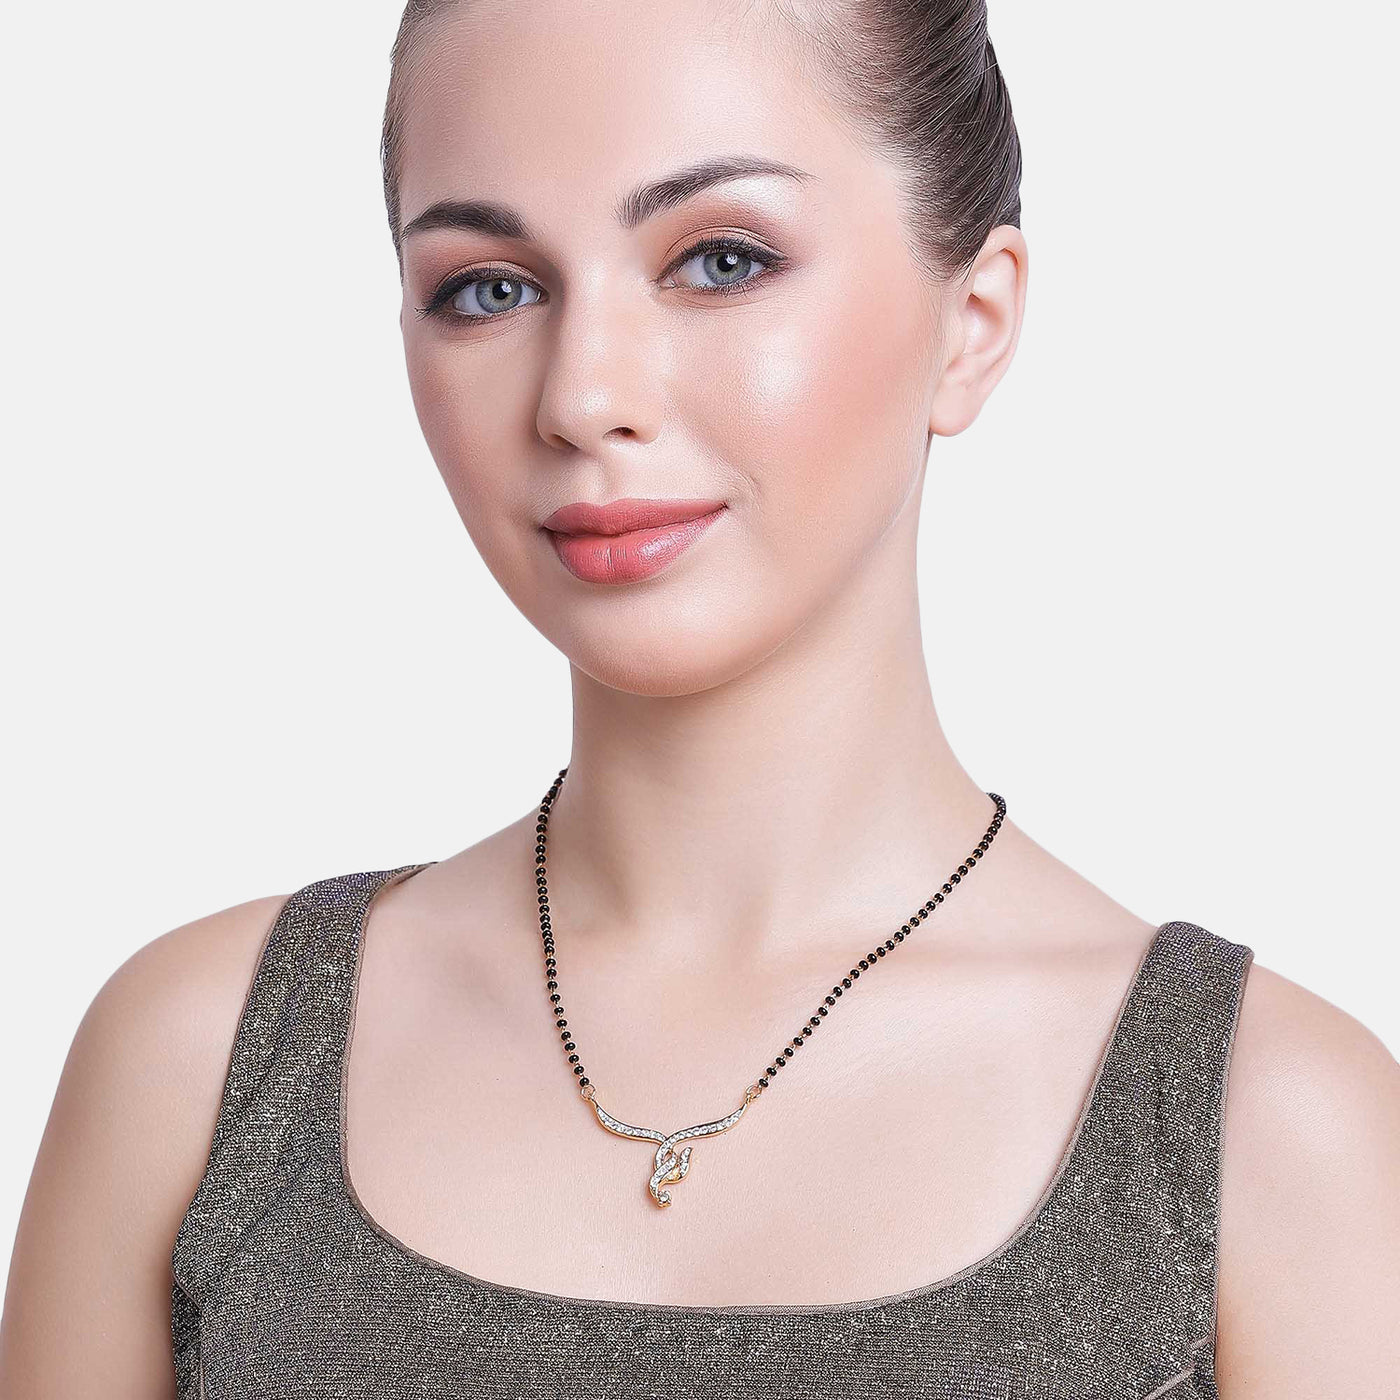 Estele Gold Plated Inter-Twined Mangalsutra Necklace Set with Austrian Crystals for Women